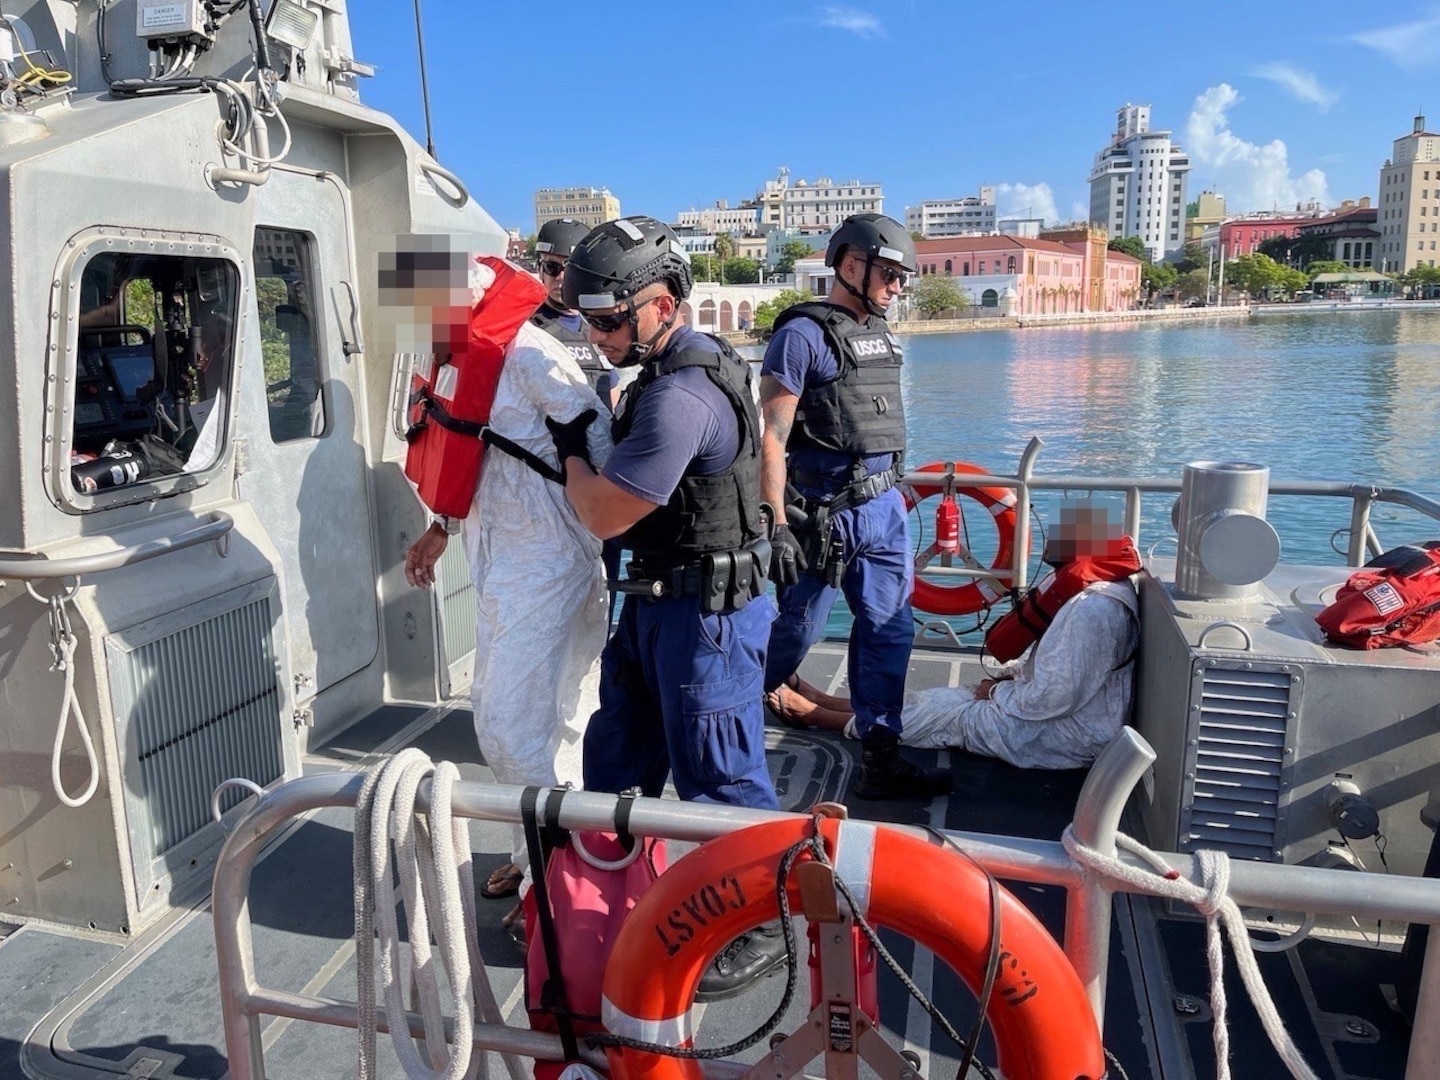 Coast Guard Station San Juan crewmembers transfer custody of three apprehended smugglers to federal law enforcement agents in San Juan, Puerto Rico, Aug. 31, 2023.  The apprehension resulted from the interdiction of a drug smuggling go-fast vessel carried out by the Coast Guard Cutter Heriberto Hernandez in Caribbean Sea waters southeast of Yabucoa, Puerto Rico, Aug. 26, 2023.  Additionally, 1,709 pounds of cocaine were seized in this case. (U.S. Coast Guard photo by Ricardo Castrodad)